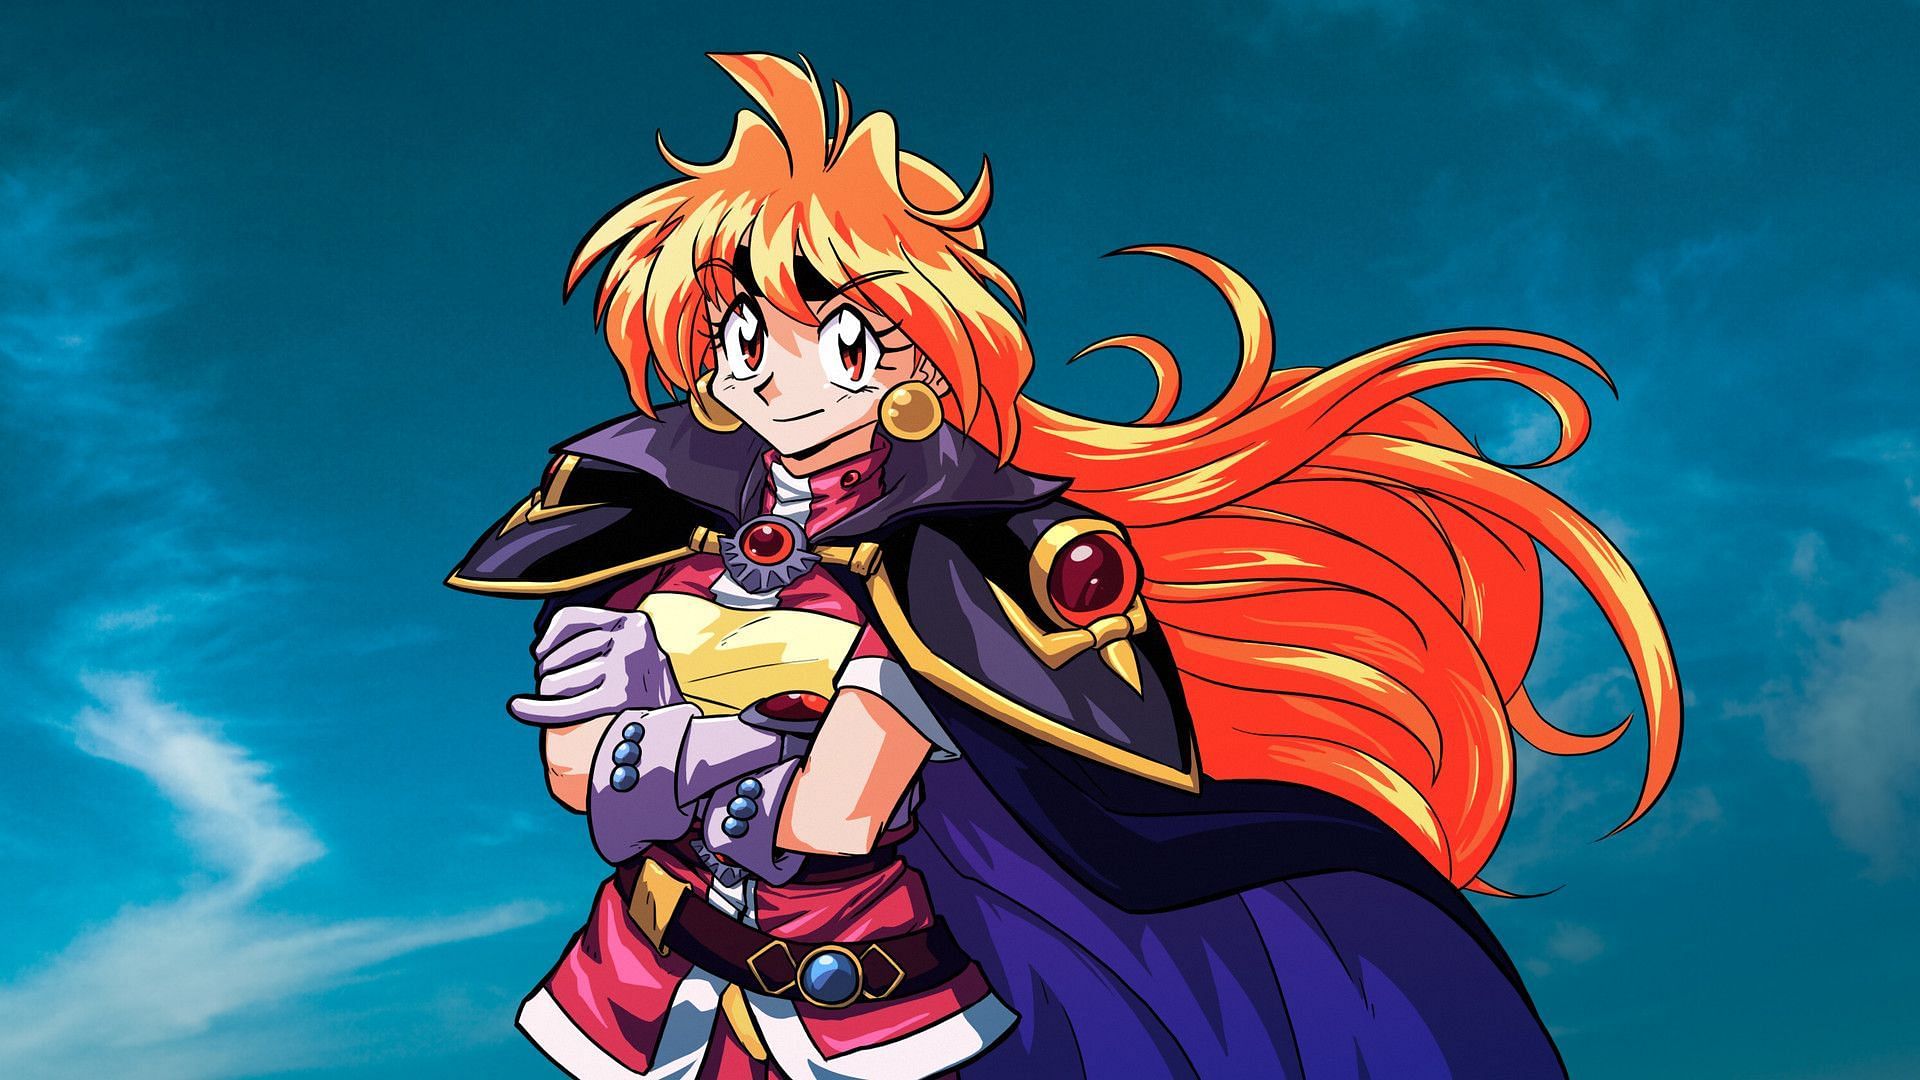 Lina Inverse is an underrated main character that pretends to be dumb (Image via E&amp;G Films).